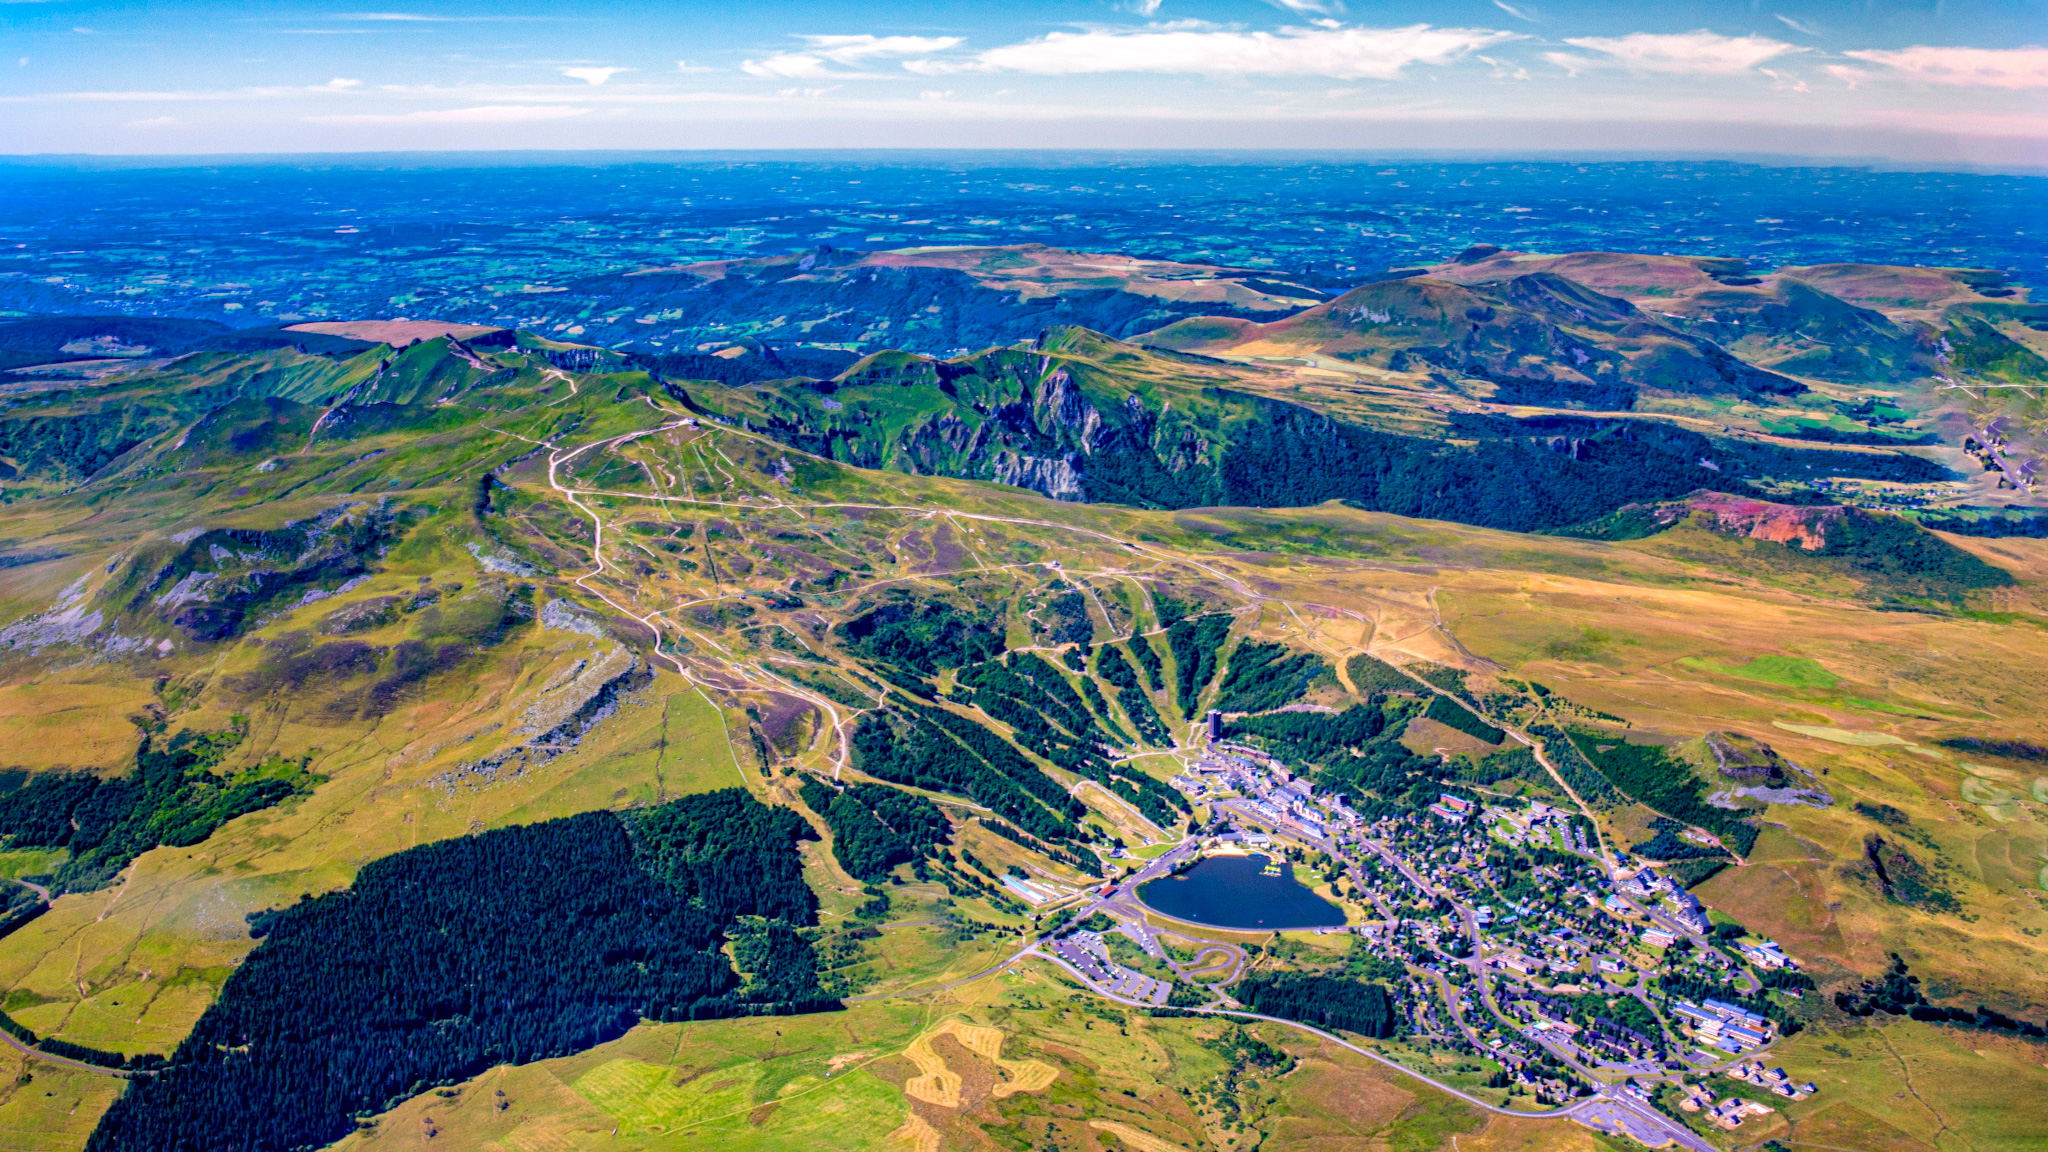 Aerial photo of the Massif du Sancy, From Super Besse to the Puy de Sancy, view of the Chaudefour Valley